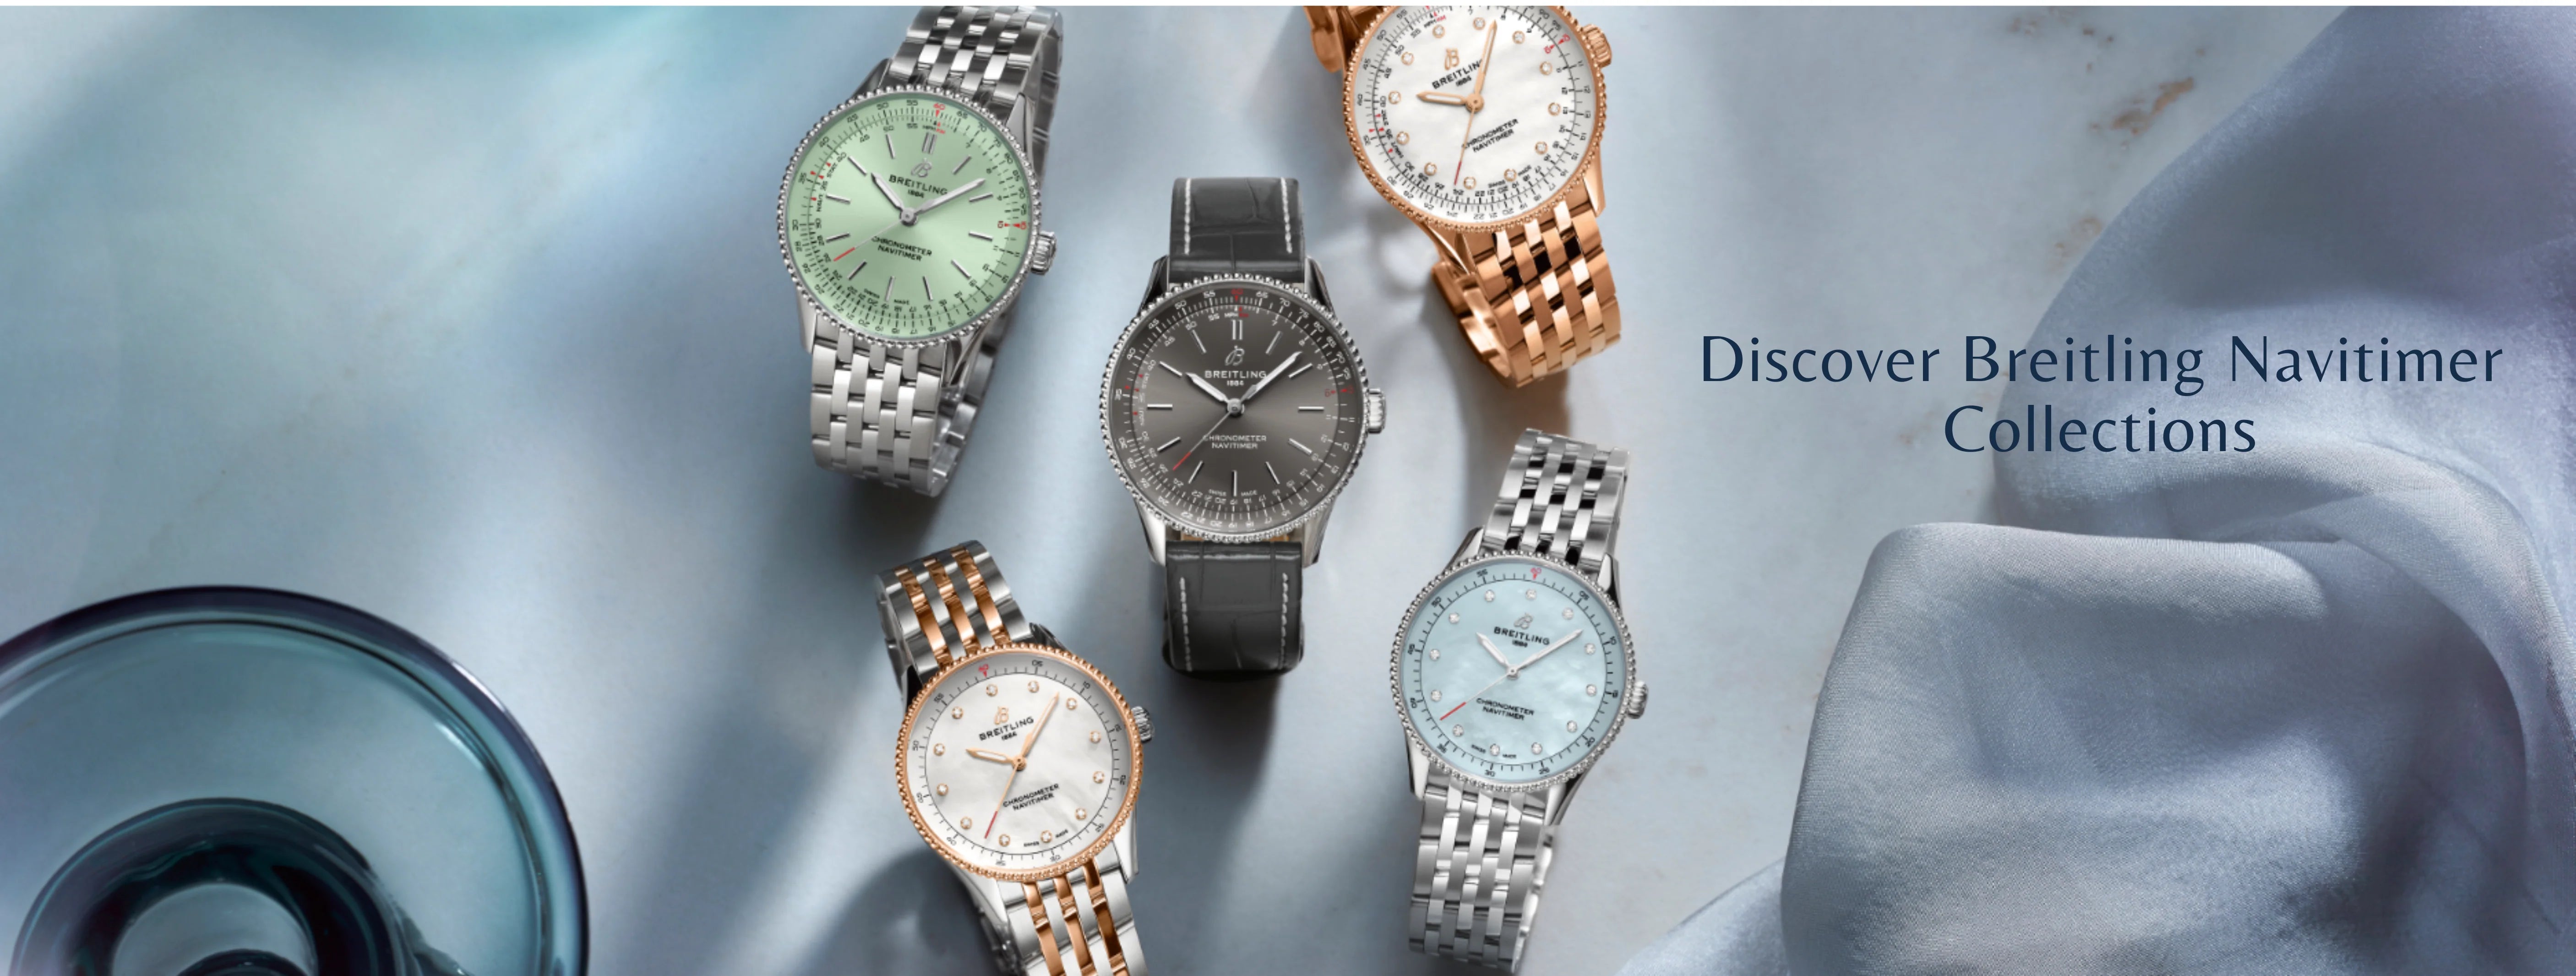 Exclusive $500 Voucher For Watches Sold By This eBay Store | aBlogtoWatch